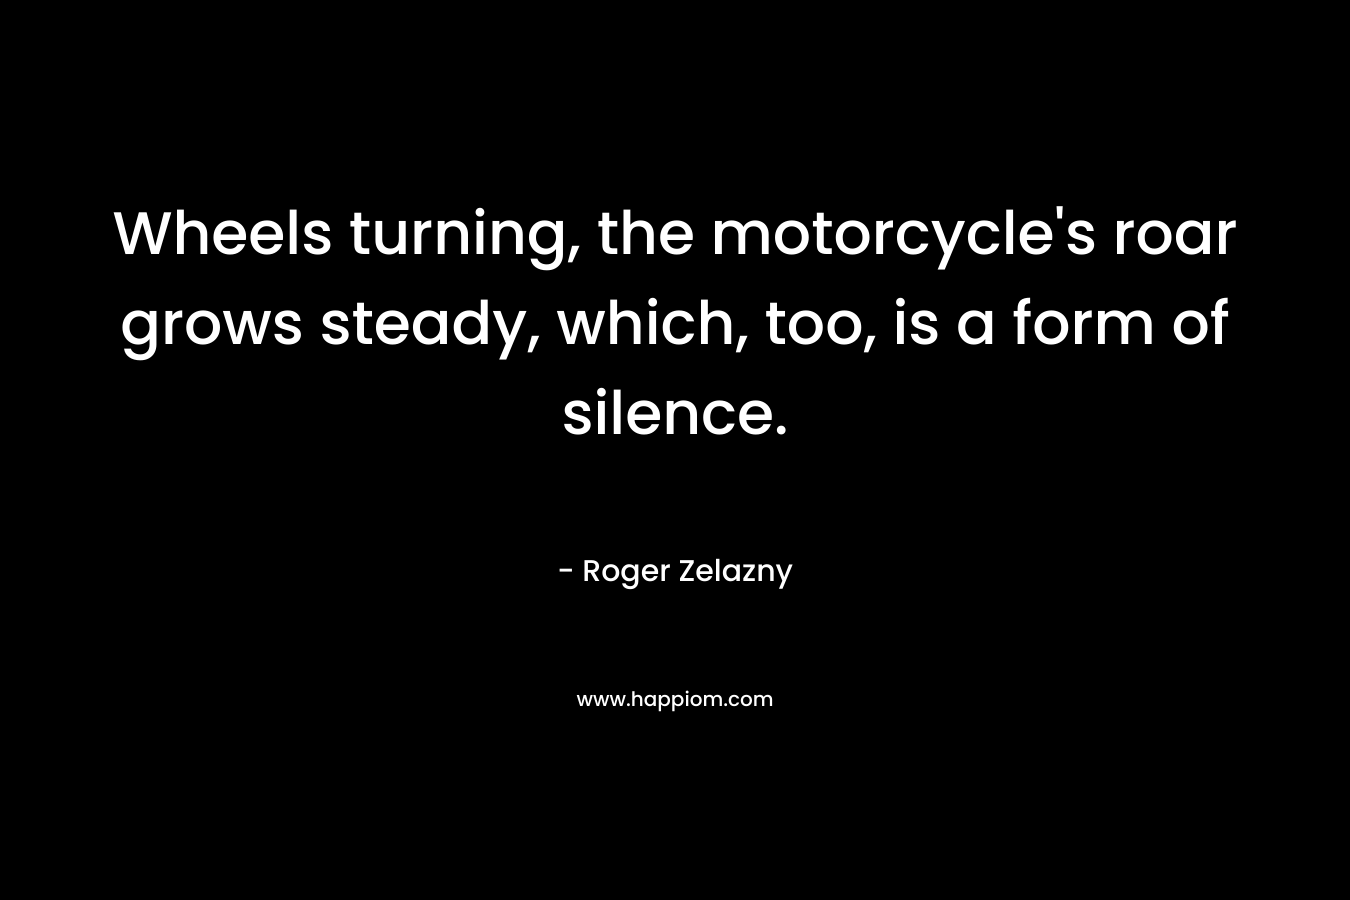 Wheels turning, the motorcycle's roar grows steady, which, too, is a form of silence.